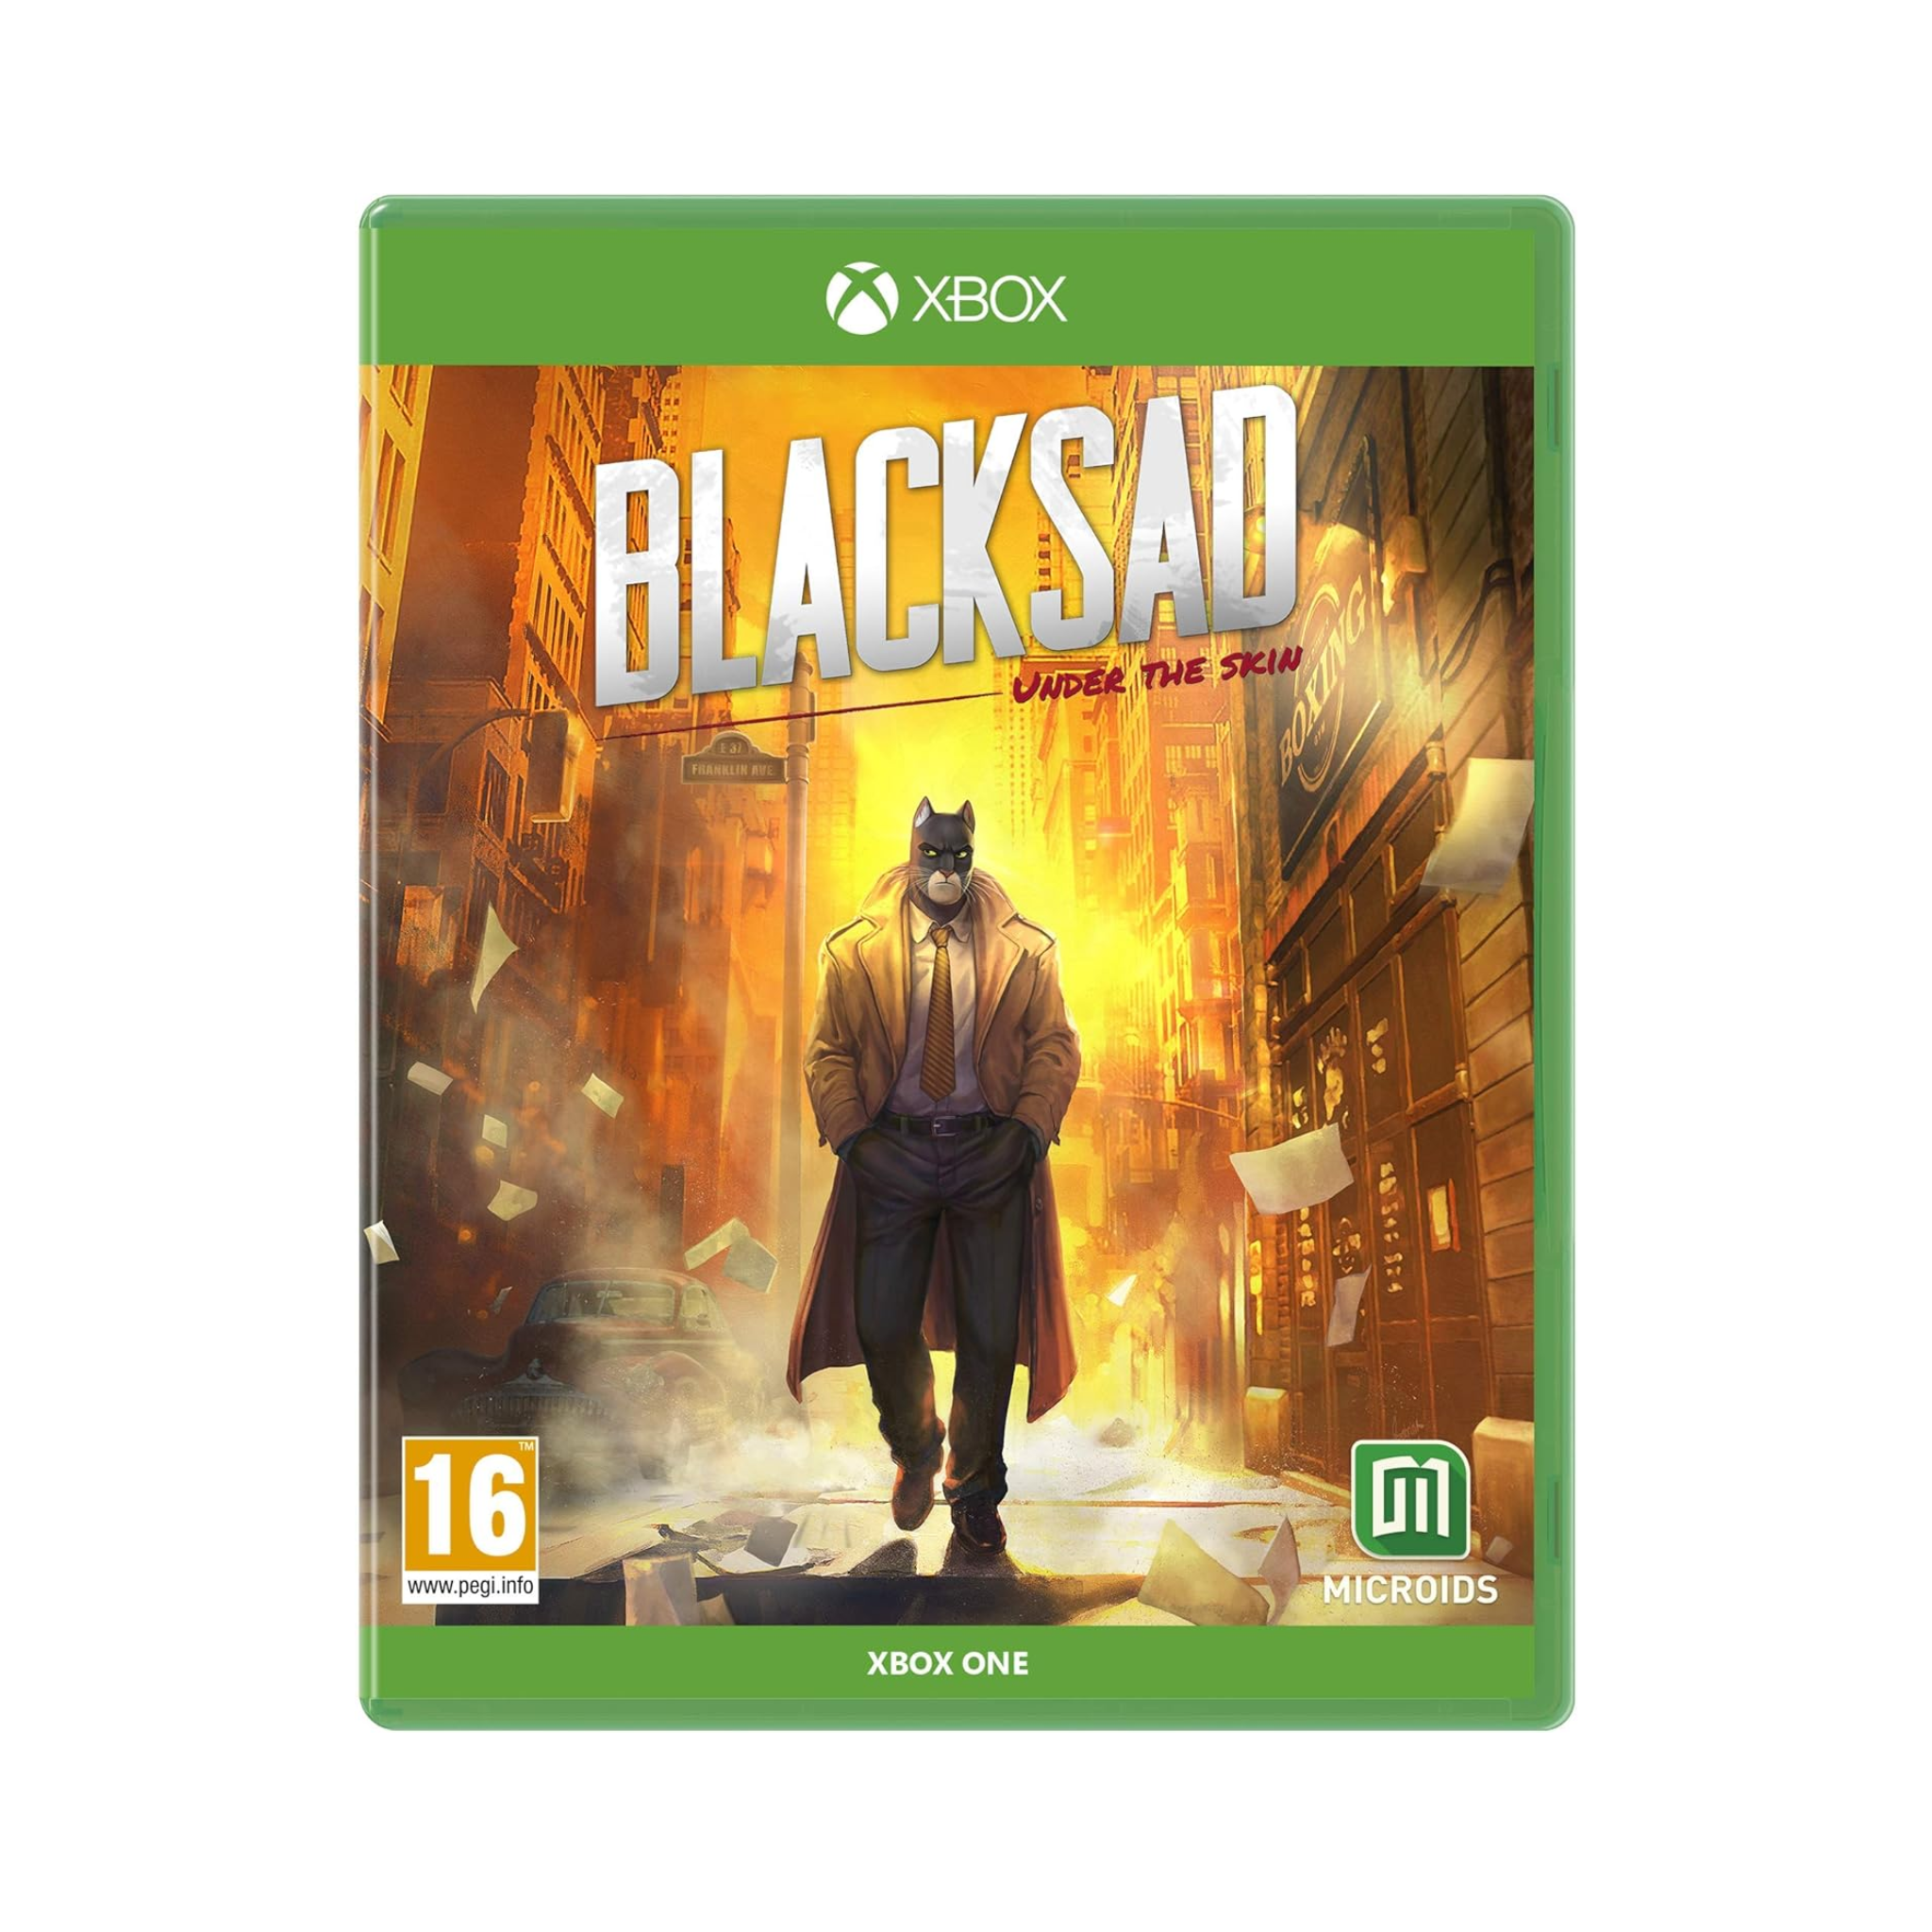 Image of Blacksad under the skin video game for xbox one